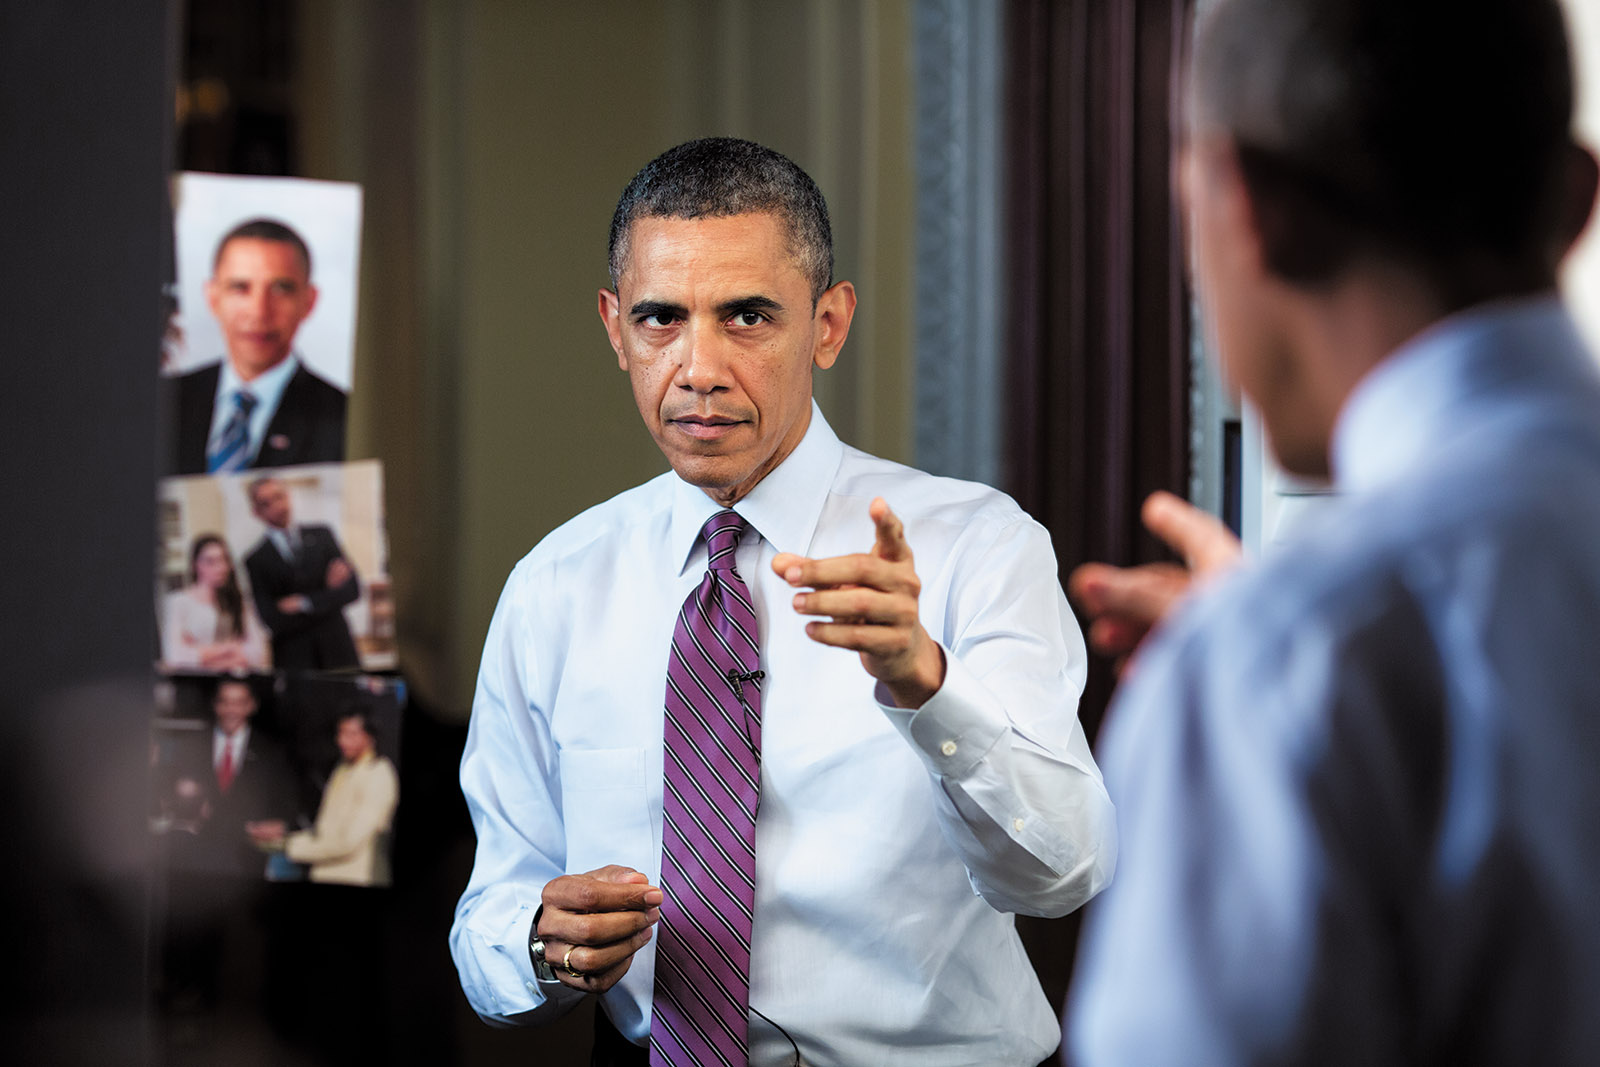 President Obama during taping for the White House Correspondents’ Dinner, April 2013; photograph by Pete Souza from his book Shade: A Tale of Two Presidents, to be published by Little, Brown in October